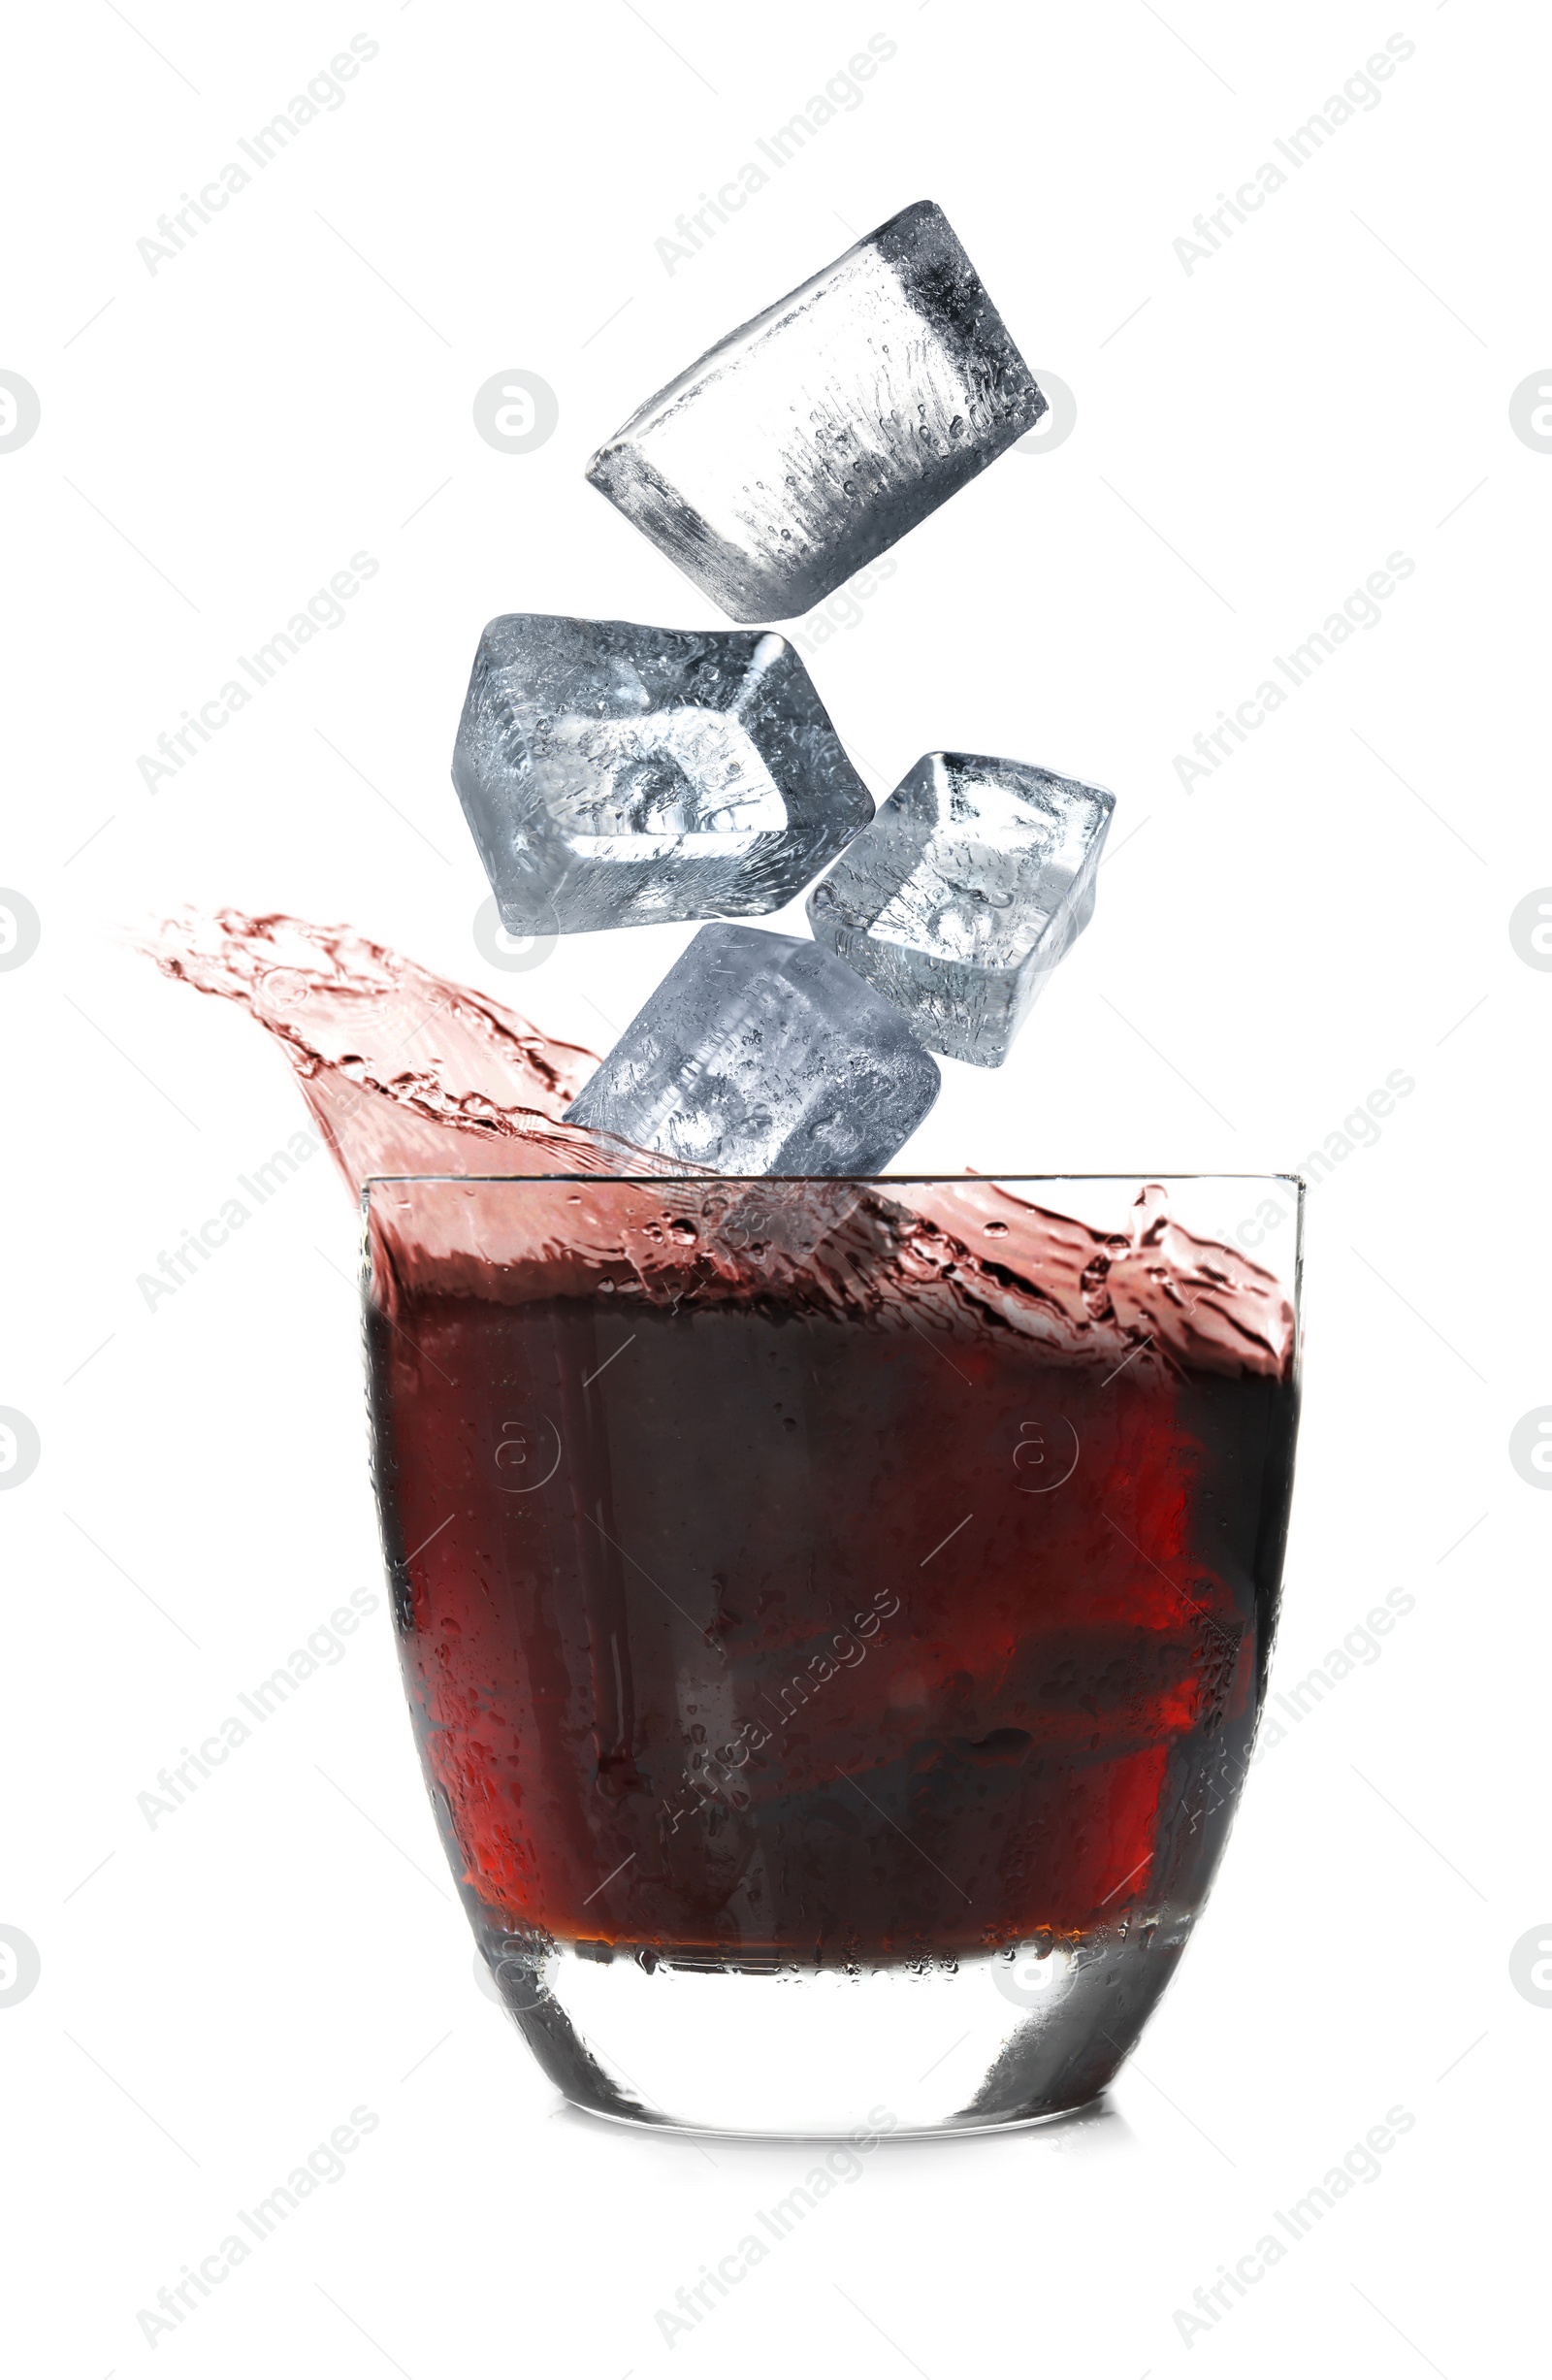 Image of Crystal ice cubes falling into refreshing drink on white background